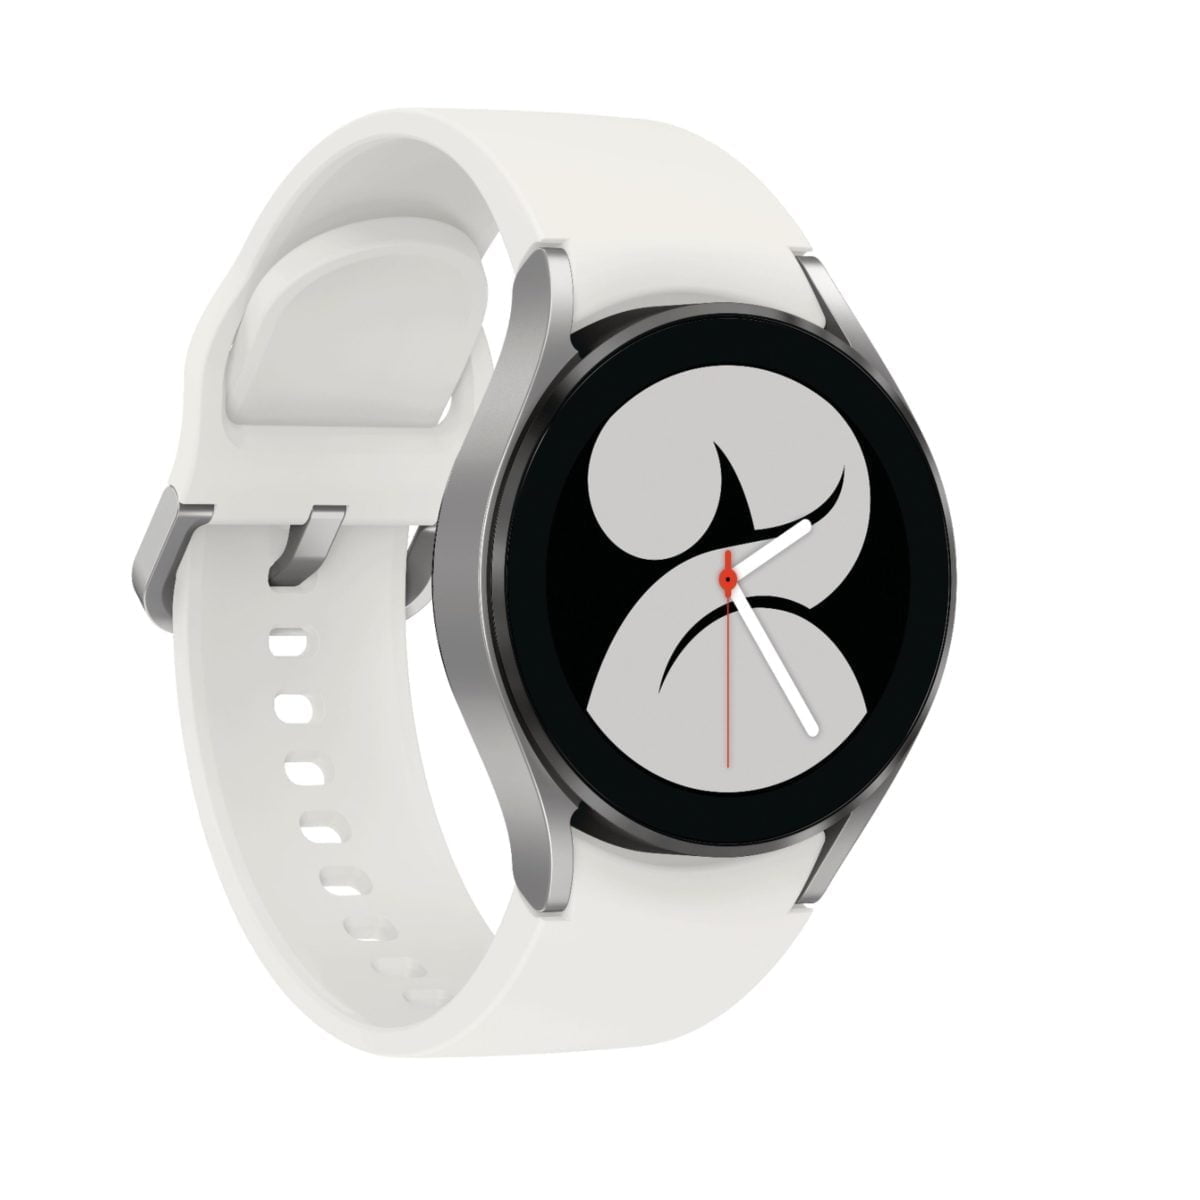 6464606Cv11D Scaled Samsung &Lt;H1&Gt;Samsung Galaxy Watch4 Aluminum Smartwatch 40Mm Bt, Gps - Black &Lt;Span Class=&Quot;Product-Data-Label Body-Copy&Quot;&Gt;&Lt;Strong&Gt;Model&Lt;/Strong&Gt;: Sm-R860Nzsaxaa&Lt;/Span&Gt;&Lt;/H1&Gt; Https://Www.youtube.com/Watch?V=Plte1N8Pl90 &Lt;Div Class=&Quot;Embedded-Component-Container Lv Product-Description&Quot;&Gt; &Lt;Div Id=&Quot;Shop-Product-Description-6031181&Quot; Class=&Quot;None&Quot; Data-Version=&Quot;1.3.38&Quot;&Gt; &Lt;Div Class=&Quot;Shop-Product-Description&Quot;&Gt;&Lt;Section Class=&Quot;Align-Heading-Left&Quot; Data-Reactroot=&Quot;&Quot;&Gt; &Lt;Div Class=&Quot;Long-Description-Container Body-Copy &Quot;&Gt; &Lt;Div Class=&Quot;Html-Fragment&Quot;&Gt; &Lt;Div&Gt; &Lt;Div&Gt;Crush Workouts And All Your Health Goals With Samsung Galaxy Watch4. Be Your Best With The Watch That Knows You Best.&Lt;/Div&Gt; &Lt;Div&Gt;We All Want To Know More About Ourselves, So We Can Be The Best Version Of Ourselves. That'S Why We Engineered The All-New Galaxy Watch4 Classic To Be The Stylish Companion To Your Journey Towards A Healthier You Some Looks Are Timeless, Like The Galaxy Watch4 Classic’s Rotating Bezel And Vivid Screen. The Refined Design Adds Sophistication To Your Wrist For An Elevated Style. Its High-End Stainless Steel Materials Shows Off Its Powerful And Intuitive Functionality&Lt;/Div&Gt; &Lt;/Div&Gt; &Lt;/Div&Gt; &Lt;/Div&Gt; &Lt;/Section&Gt;&Lt;/Div&Gt; &Lt;/Div&Gt; &Lt;/Div&Gt; Galaxy Watch4 Samsung Galaxy Watch 4 Aluminum Smartwatch 40Mm- Silver